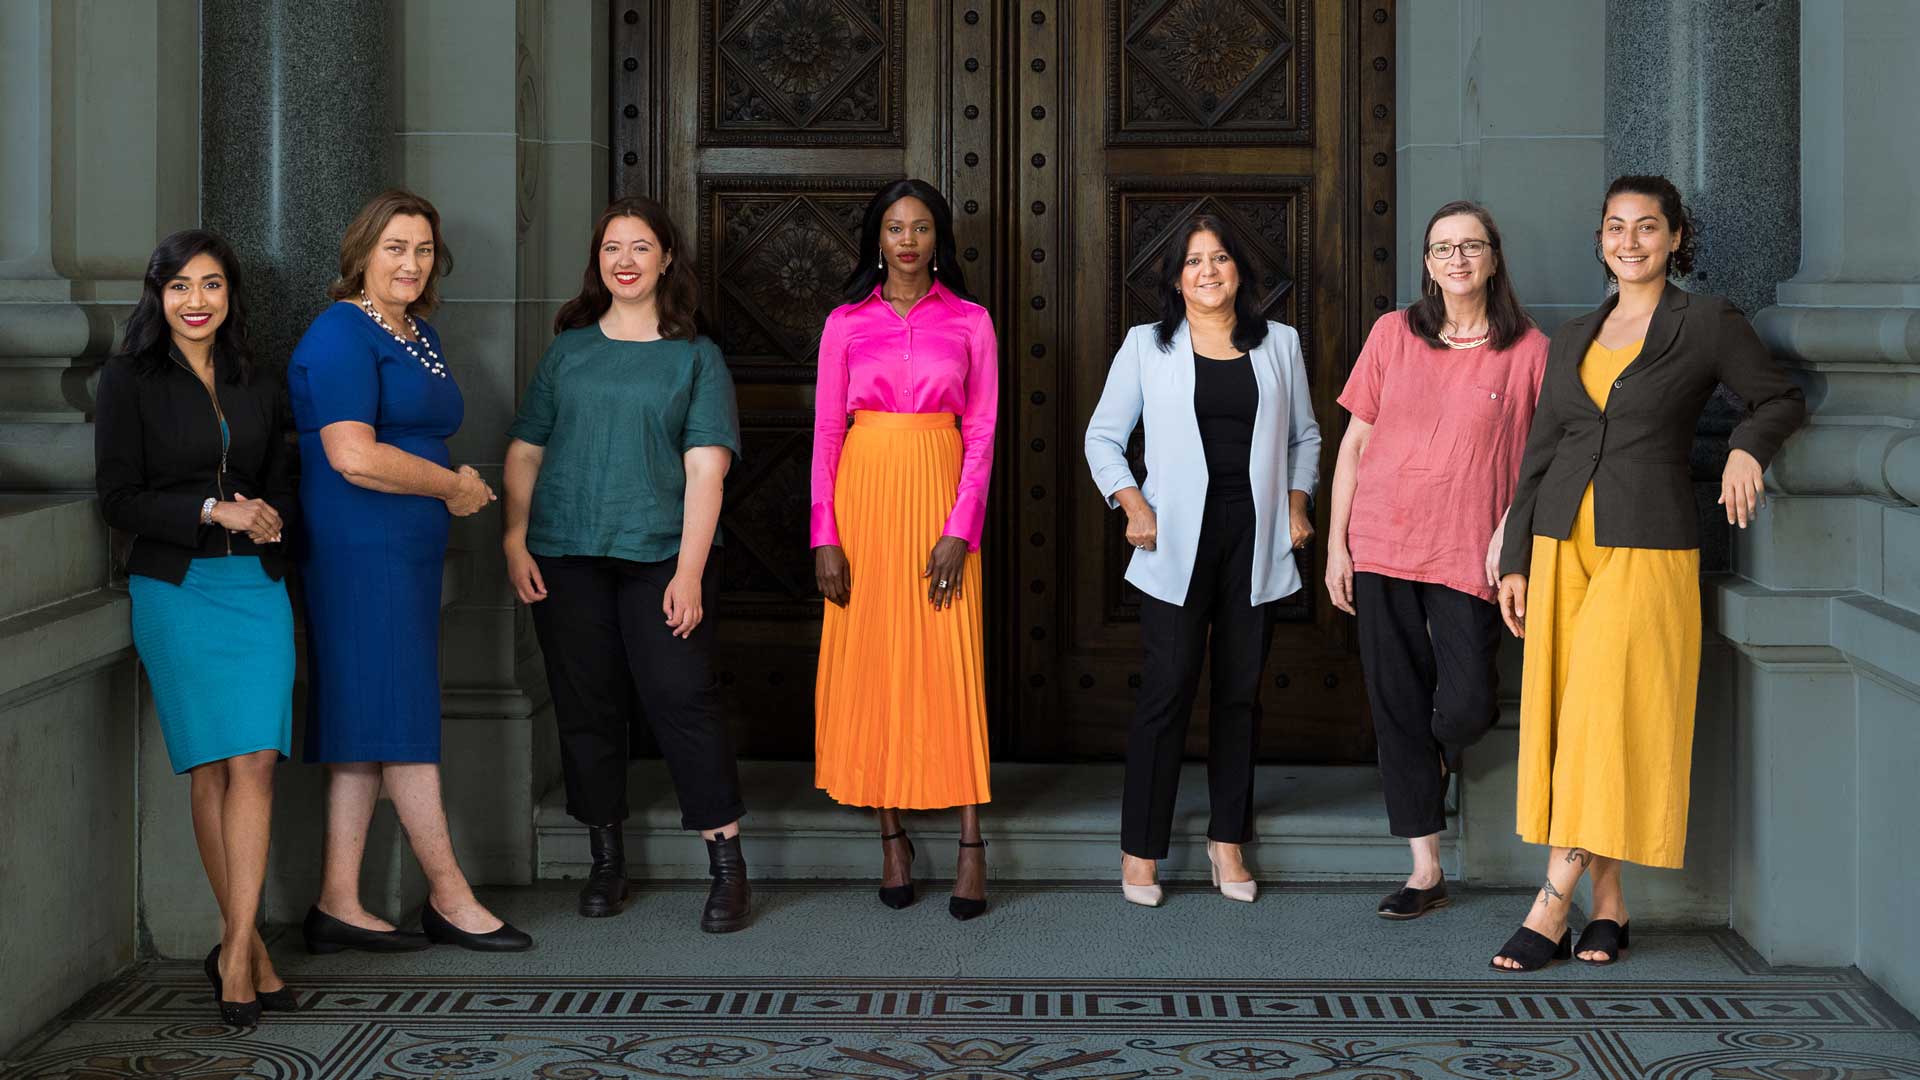 Group of 7 diverse women wearing bright block coloured clothing. the background is an exterior of a historic parliamentary building, washed out in dark blue, making the women stand out against the background.